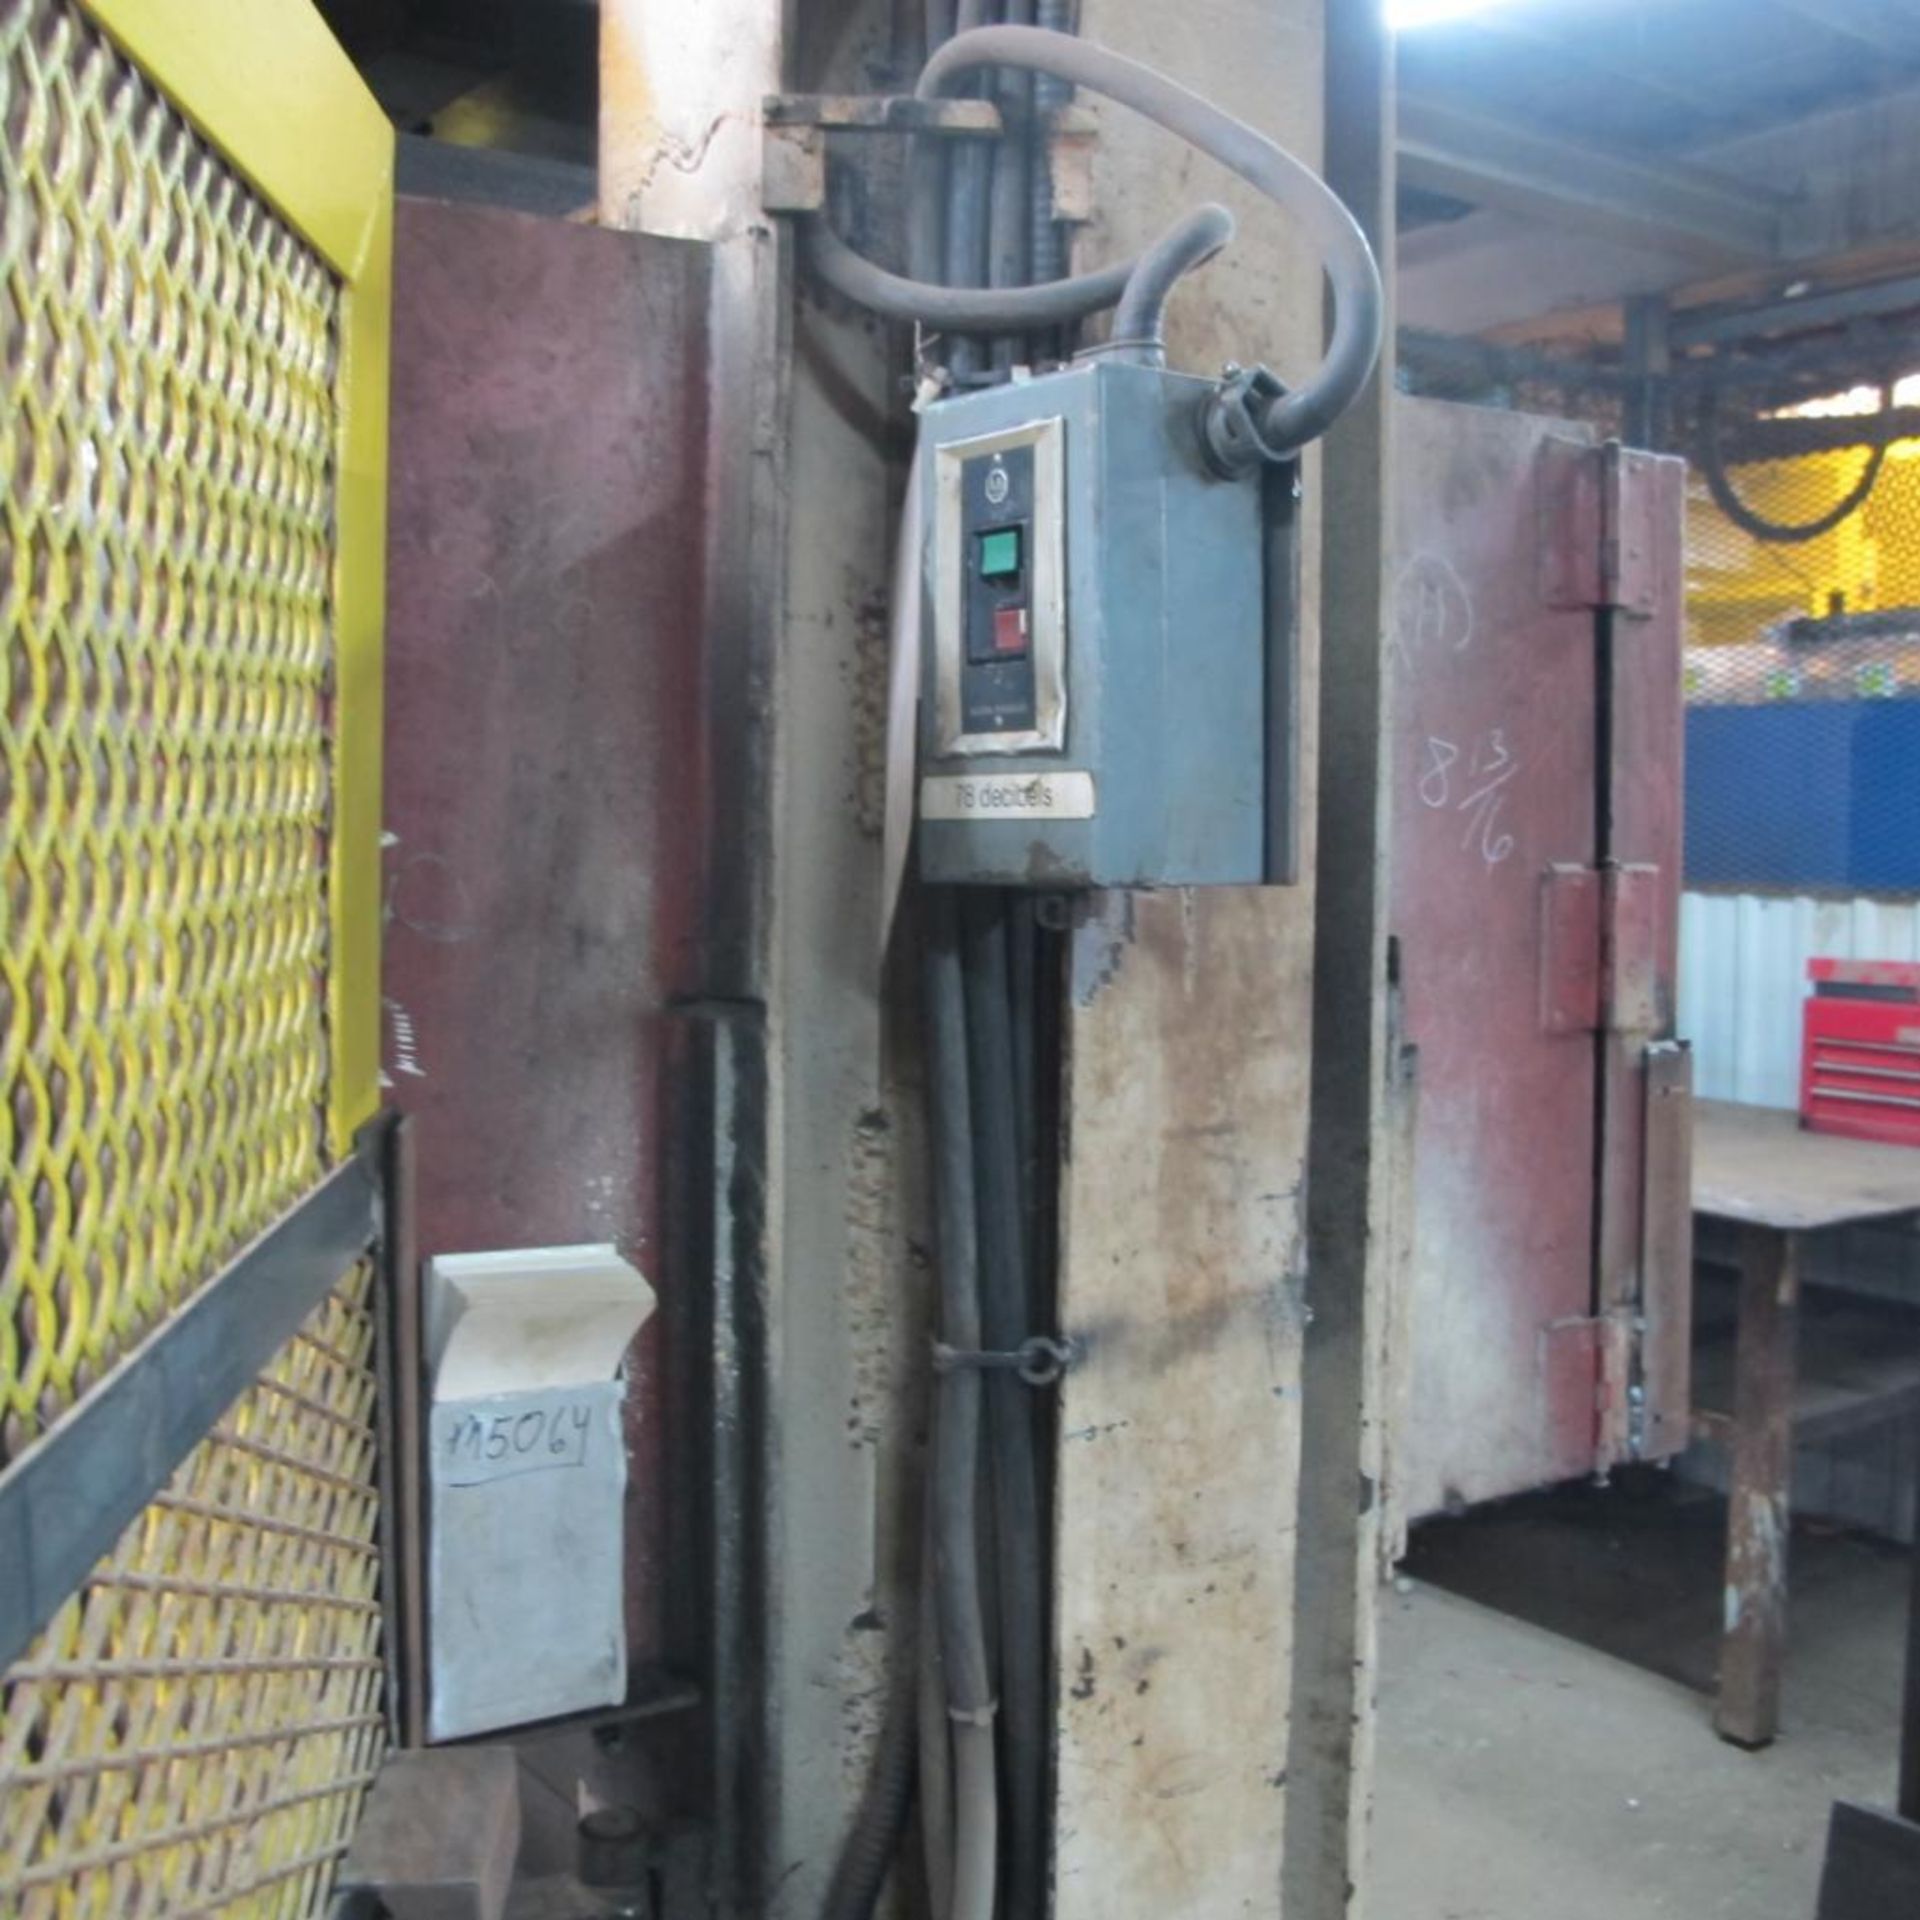 MILLER HYDRAULIC POWER PRESS COMPONENTS W/CONTROLLER AND CABLES (NO PRESS FRAME WHICH IS PART OF BLD - Image 2 of 3